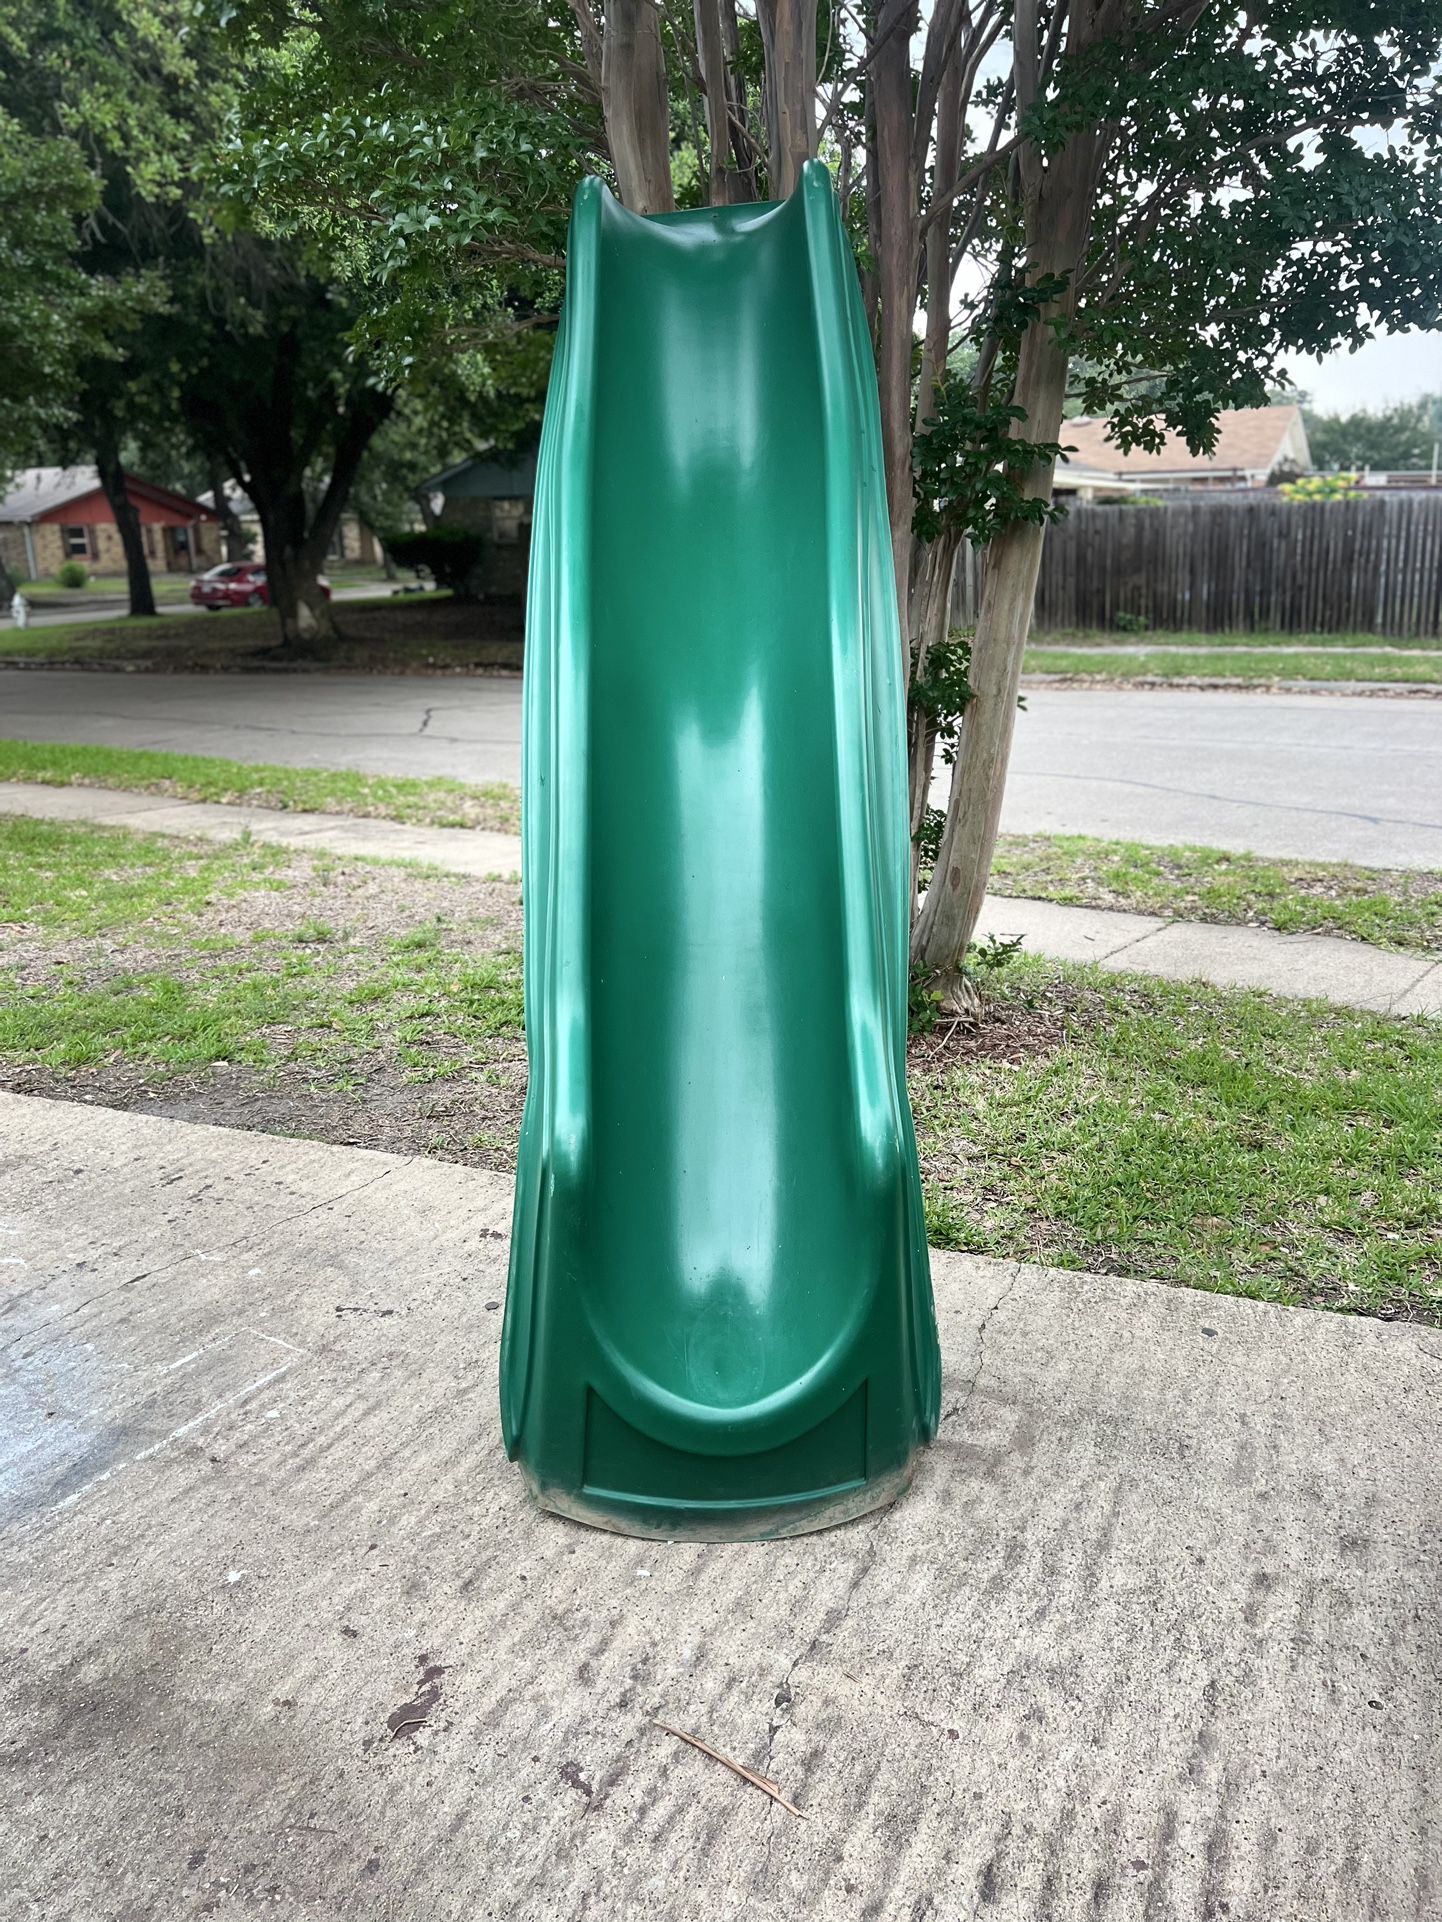 I am selling a 10 foot long slide in excellent condition $200 home delivery available for an extra transportation cost more information in inbox